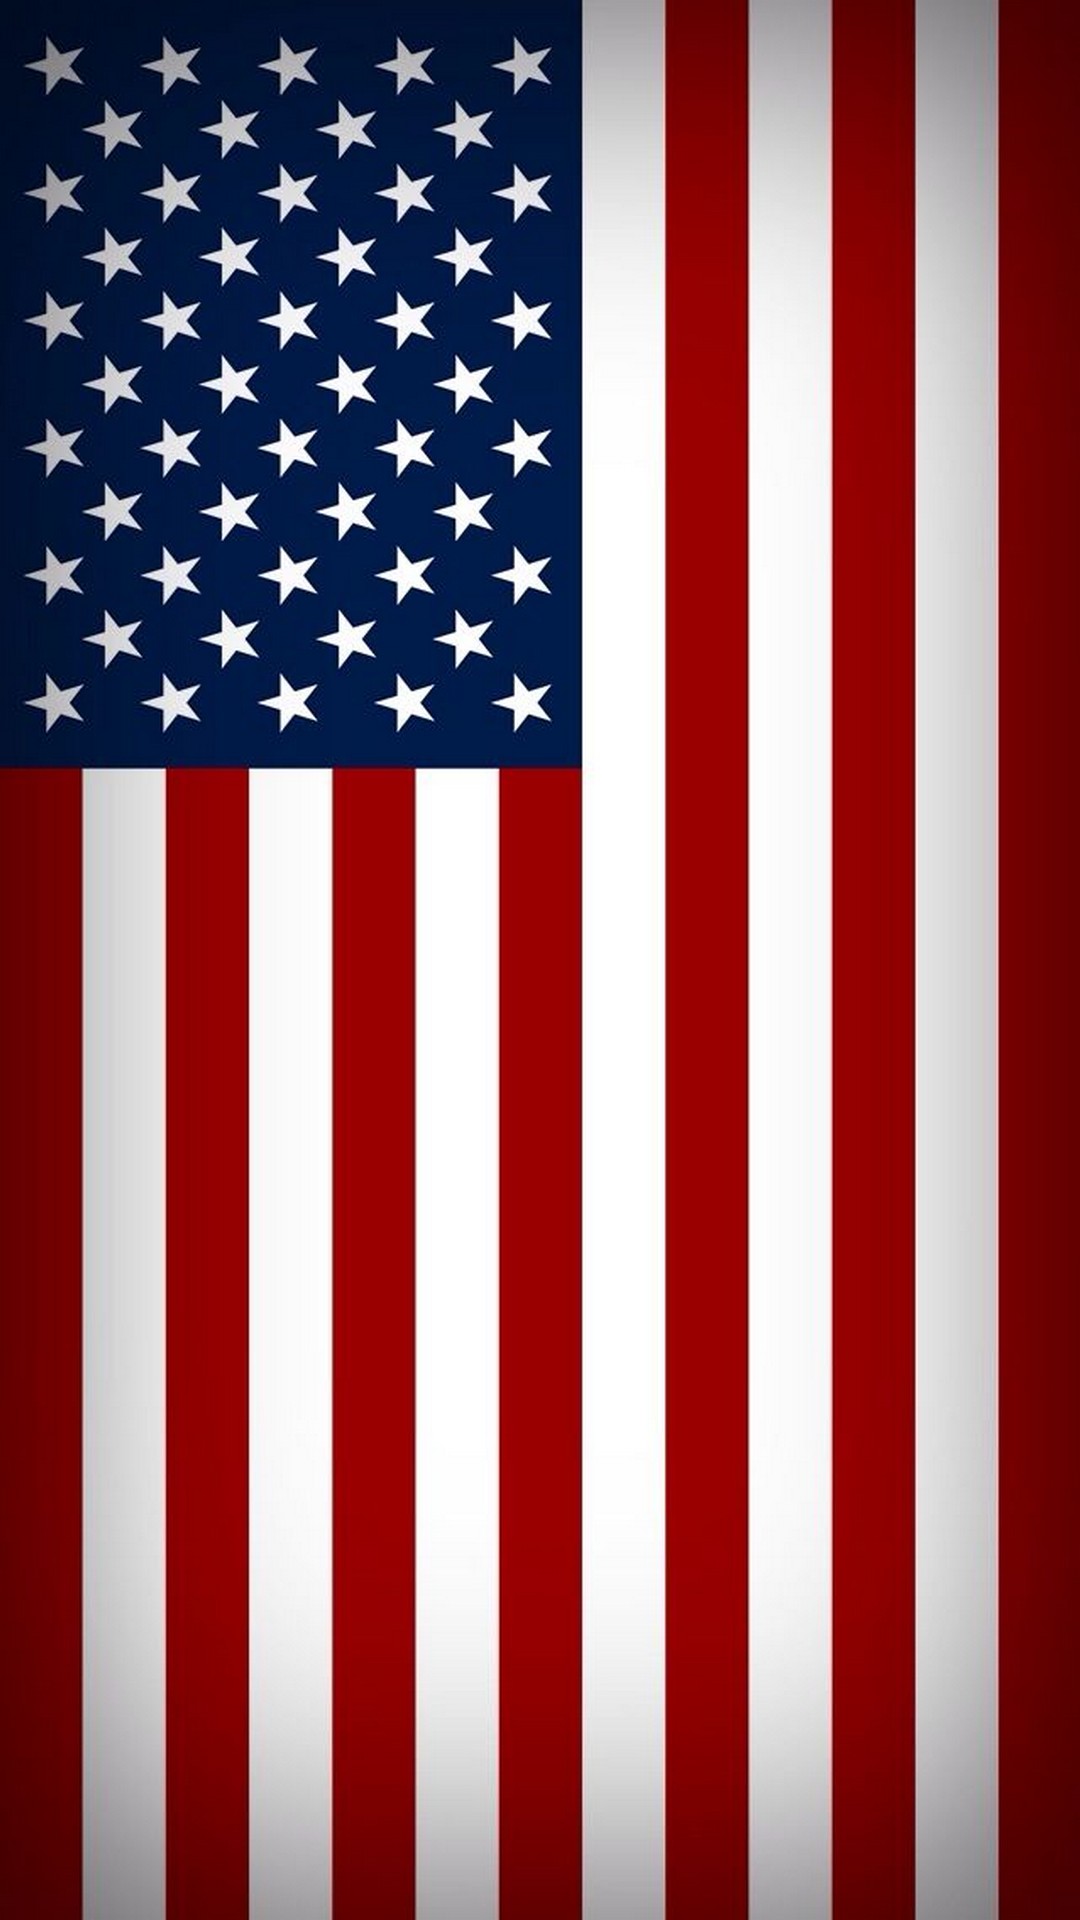 Wallpaper American Flag Android with high-resolution 1080x1920 pixel. You can use this wallpaper for your Android backgrounds, Tablet, Samsung Screensavers, Mobile Phone Lock Screen and another Smartphones device